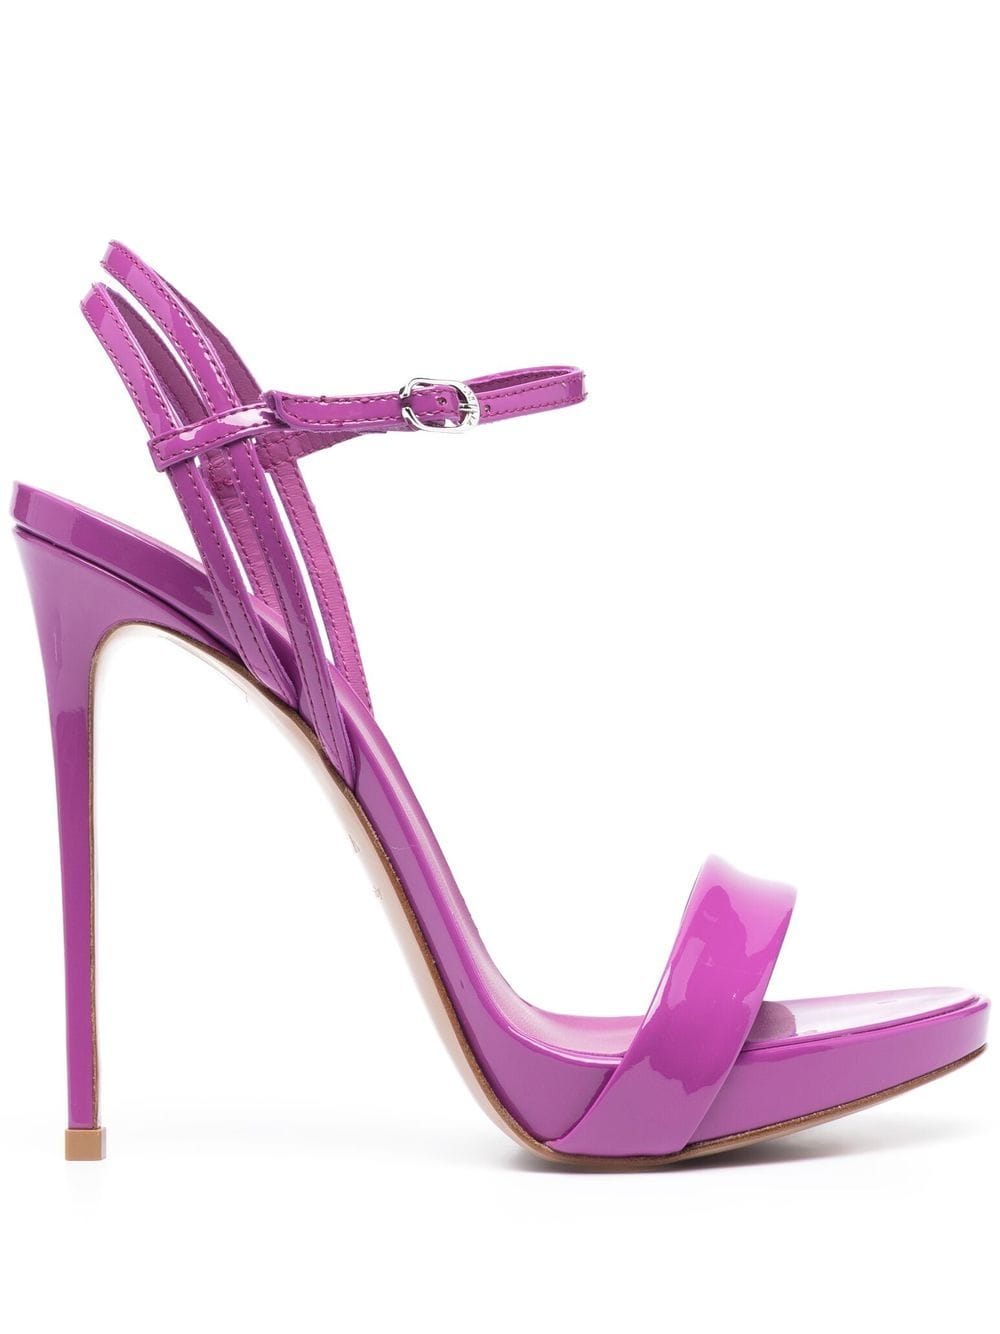 Le Silla Gwen 120mm Patent-leather Sandals In Darling